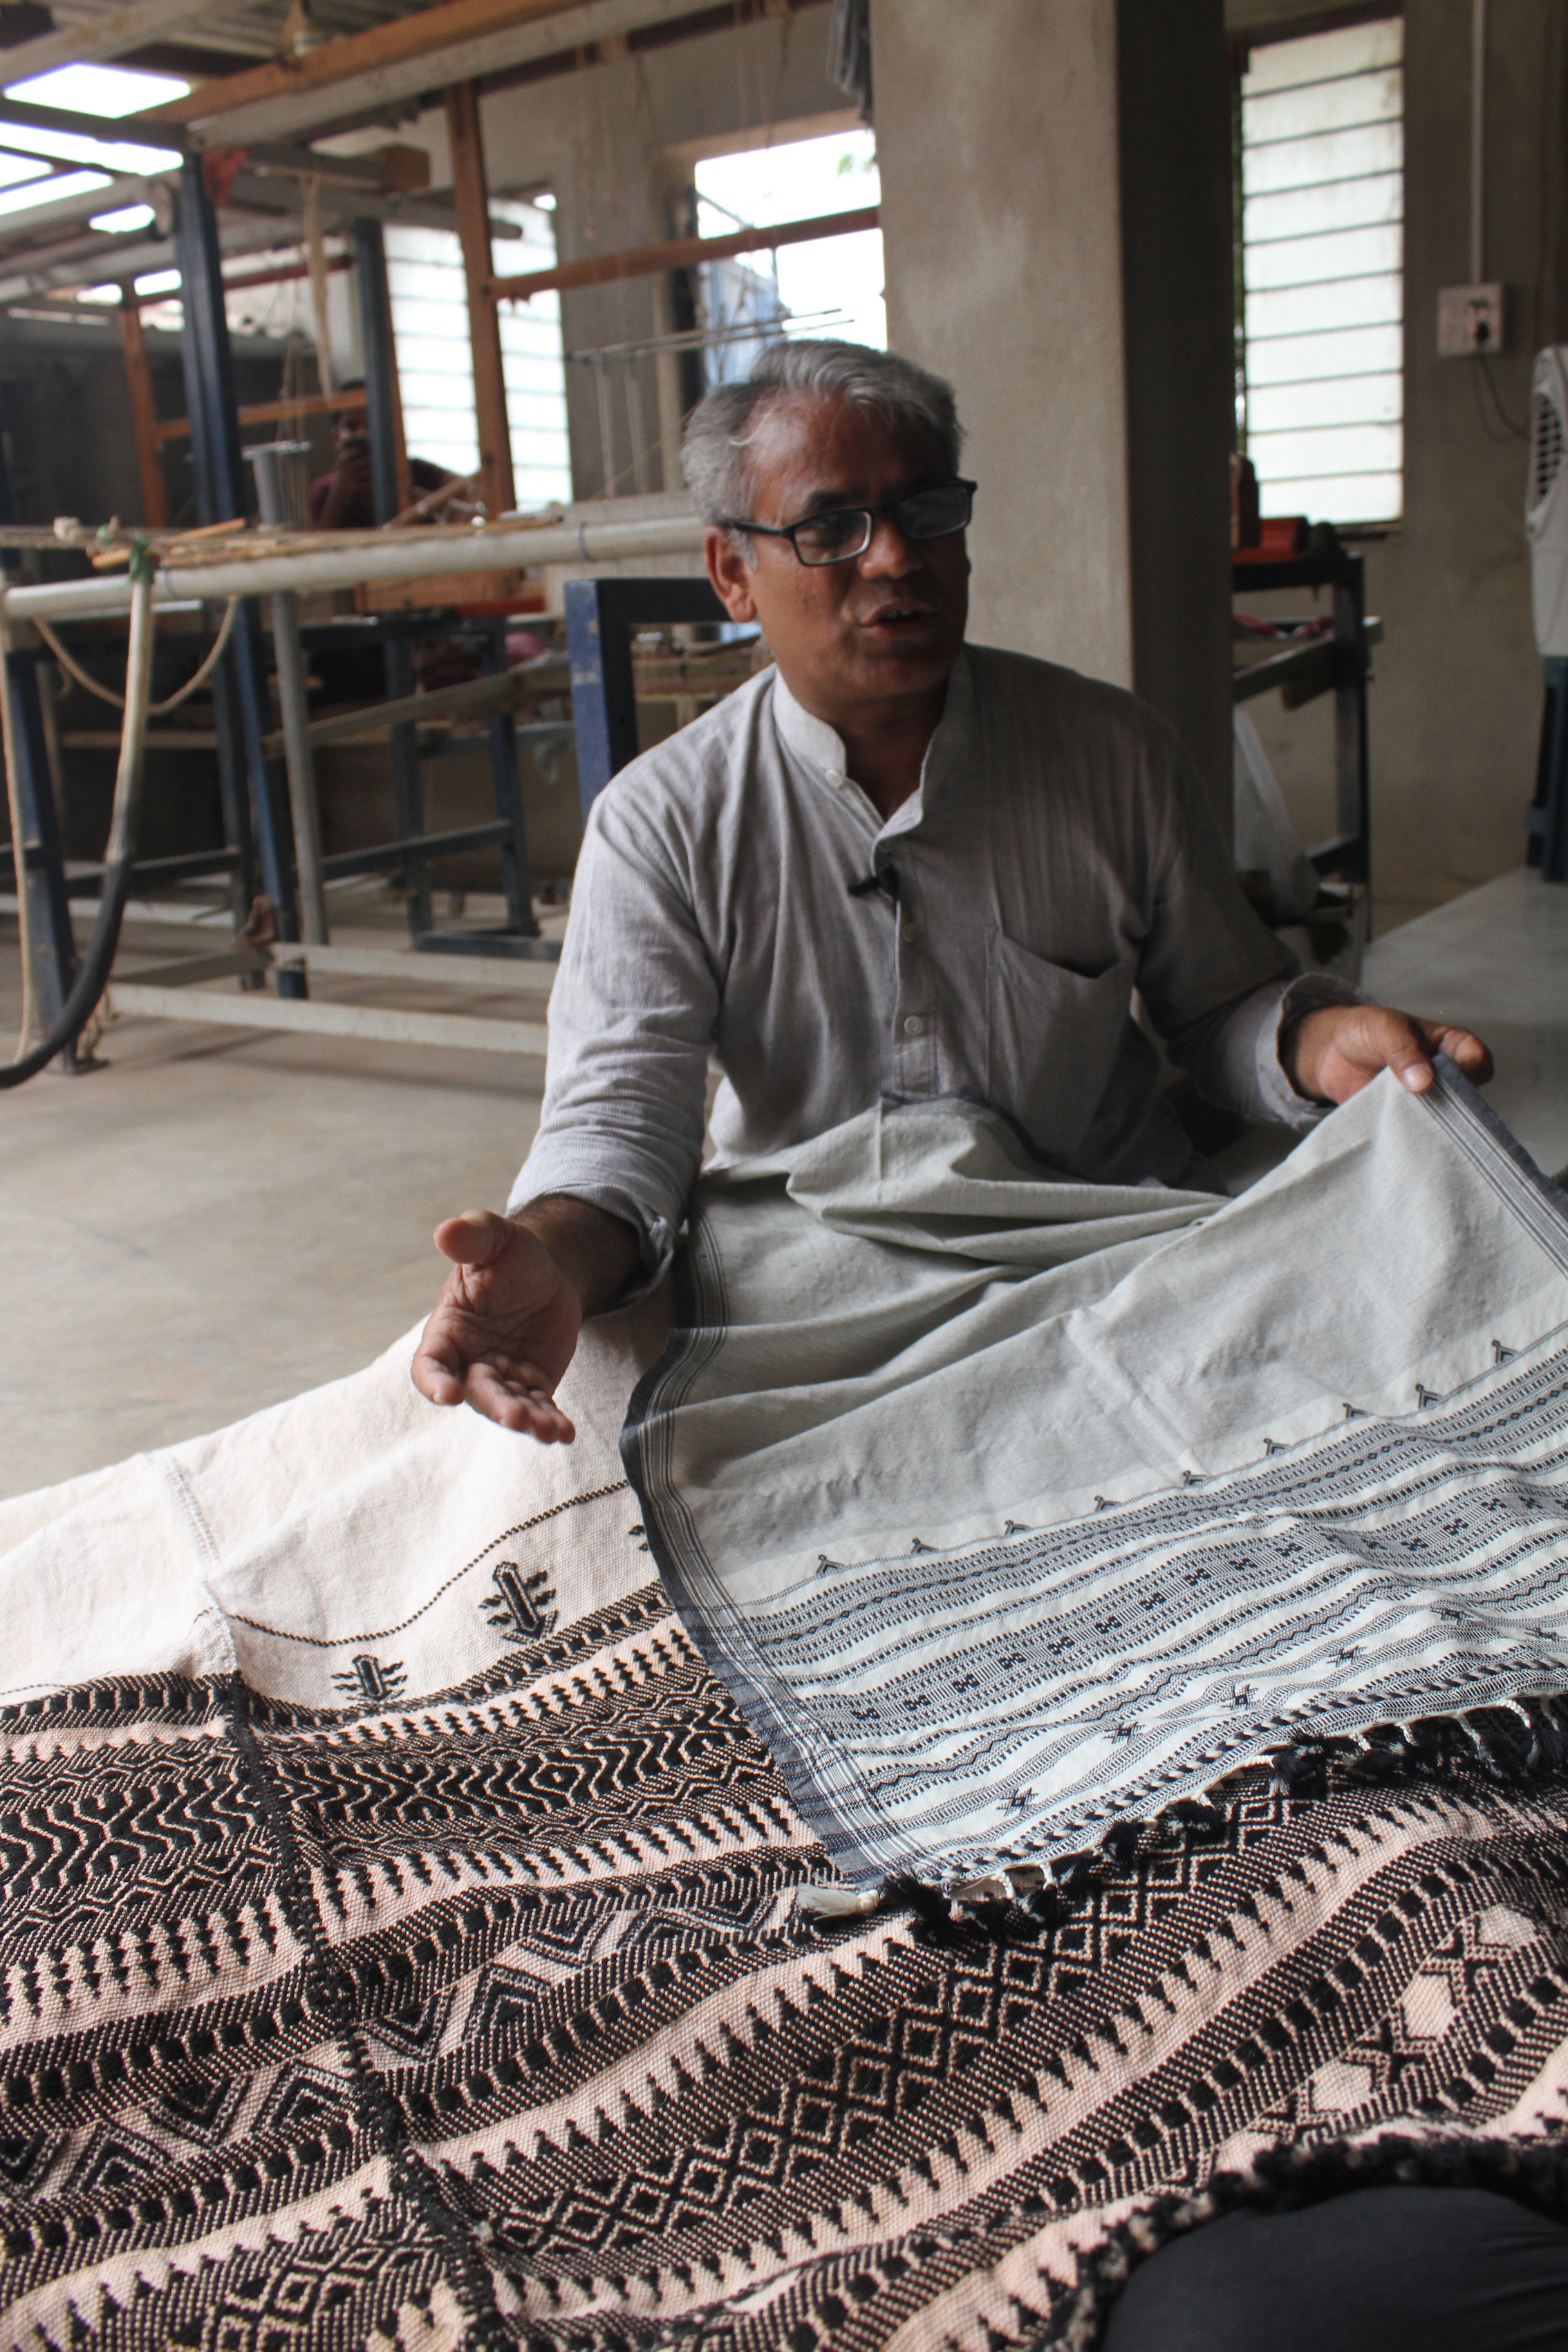  Dayalal Kudecha, a weaver from Bhujodi who attended KRV in 2008, after which he worked his way up from job-weaver to weaver-designer, entrepreneur and teacher. His products have a distinct look. He has perfected the use of natural dyes to achieve st